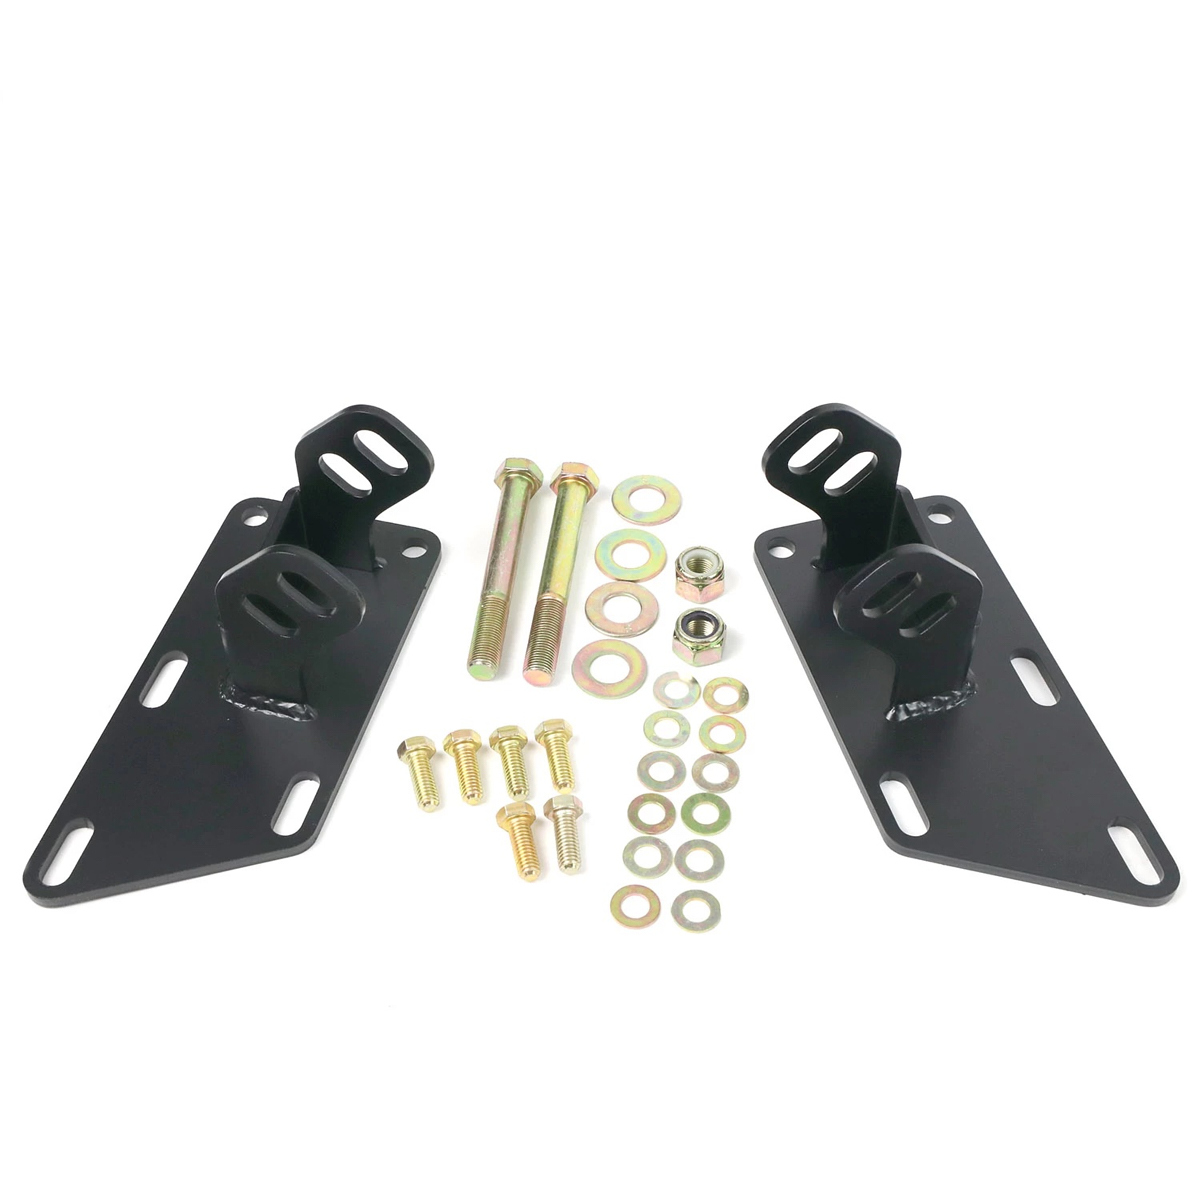 Ridetech 12319502 Motor Mount, Bolt-On, Steel, Black Paint, Hardware Included, Small Block Chevy / Big Block Chevy / GM LS-Series, Ford Fullsize Truck 1965-79, Pair